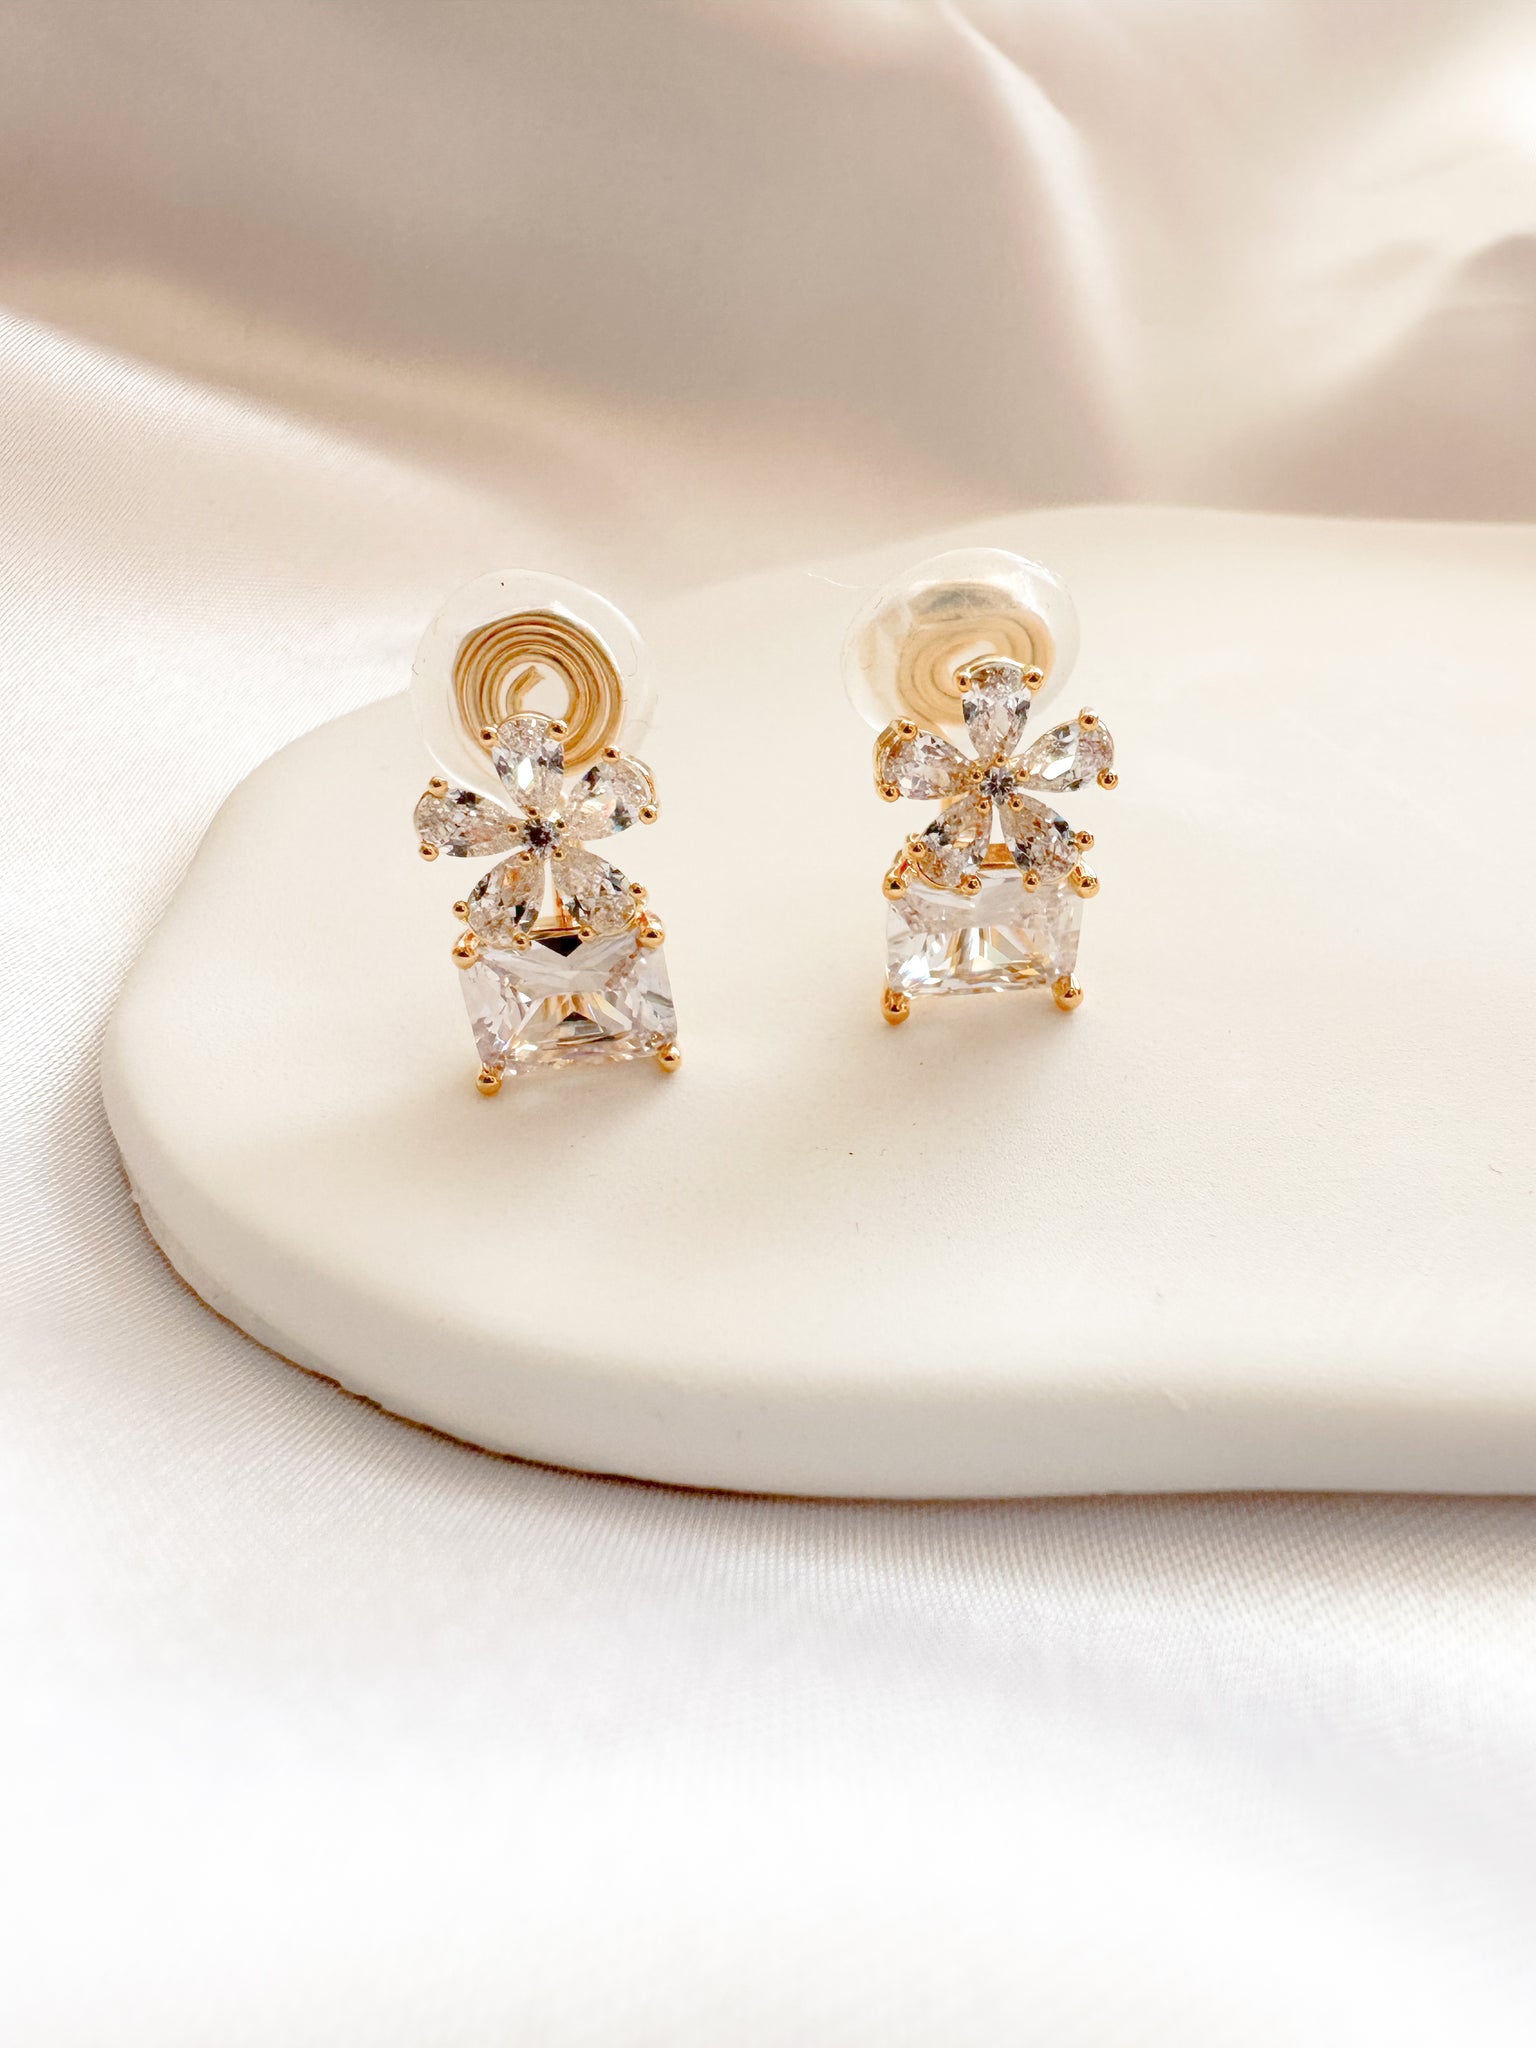 gold & white cubic zirconia shaped into a flower atop a square gem clipon earrings